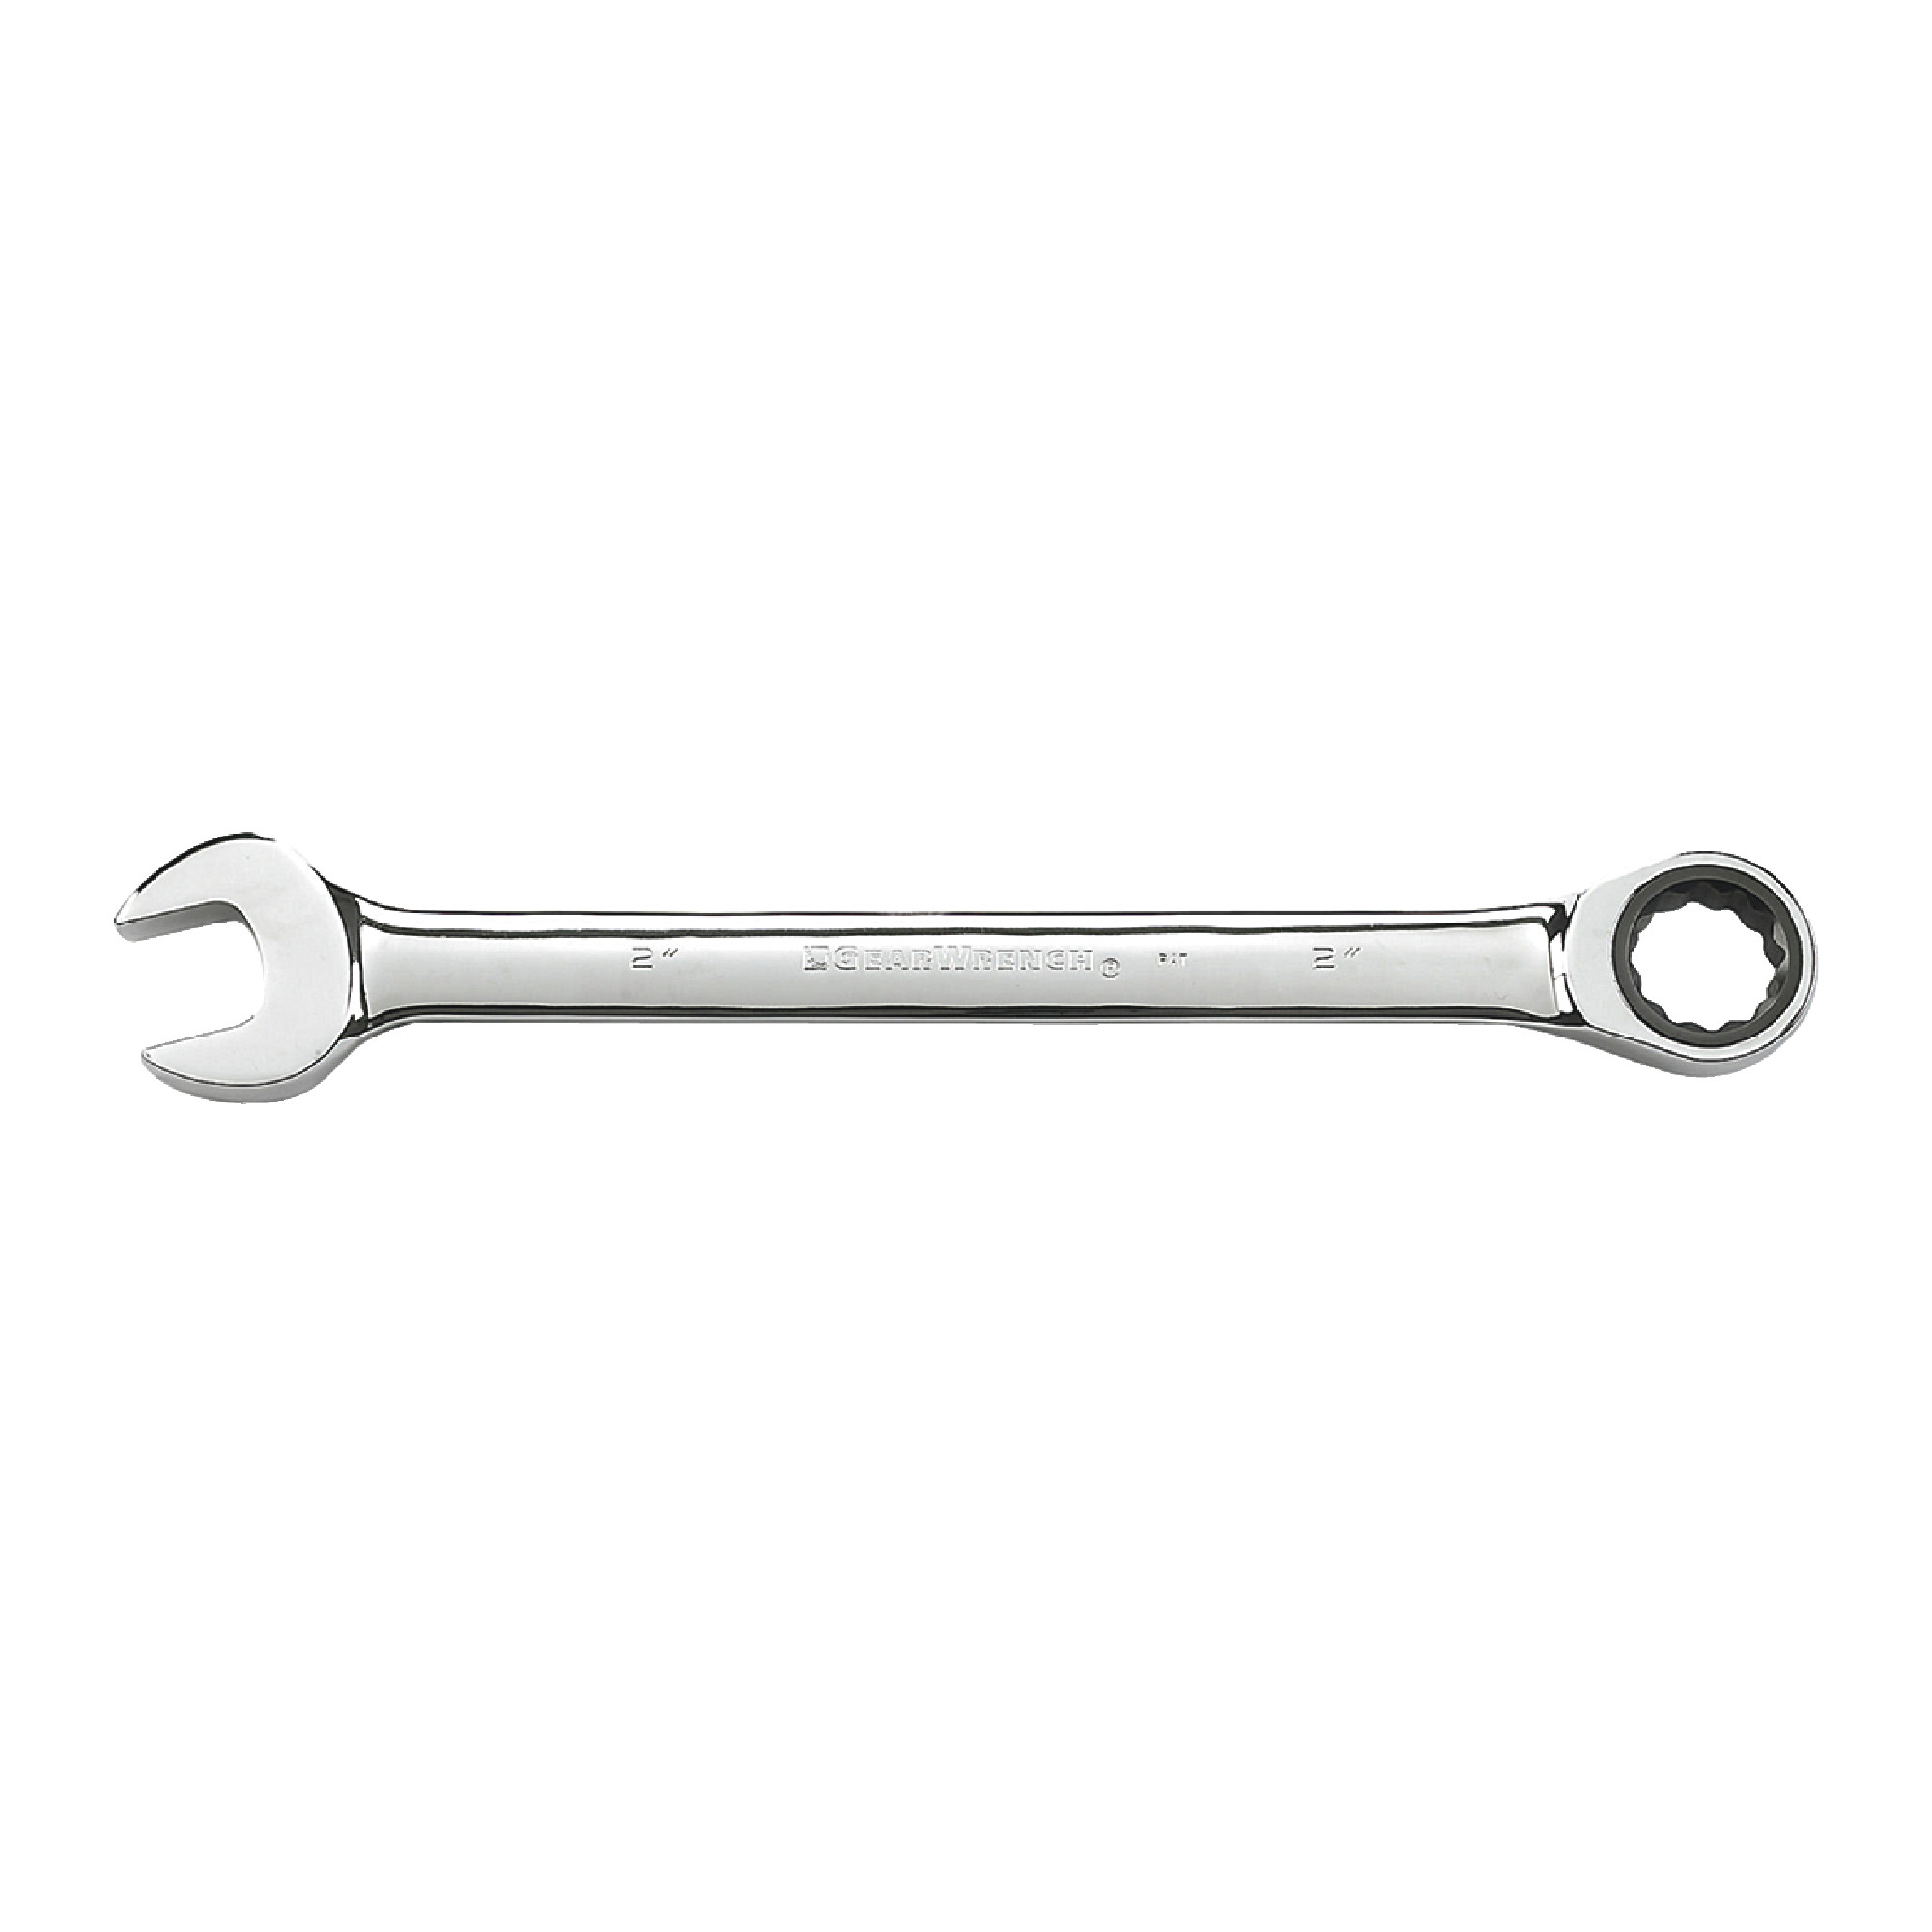 7/8" 12 Point Ratcheting Combination Wrench